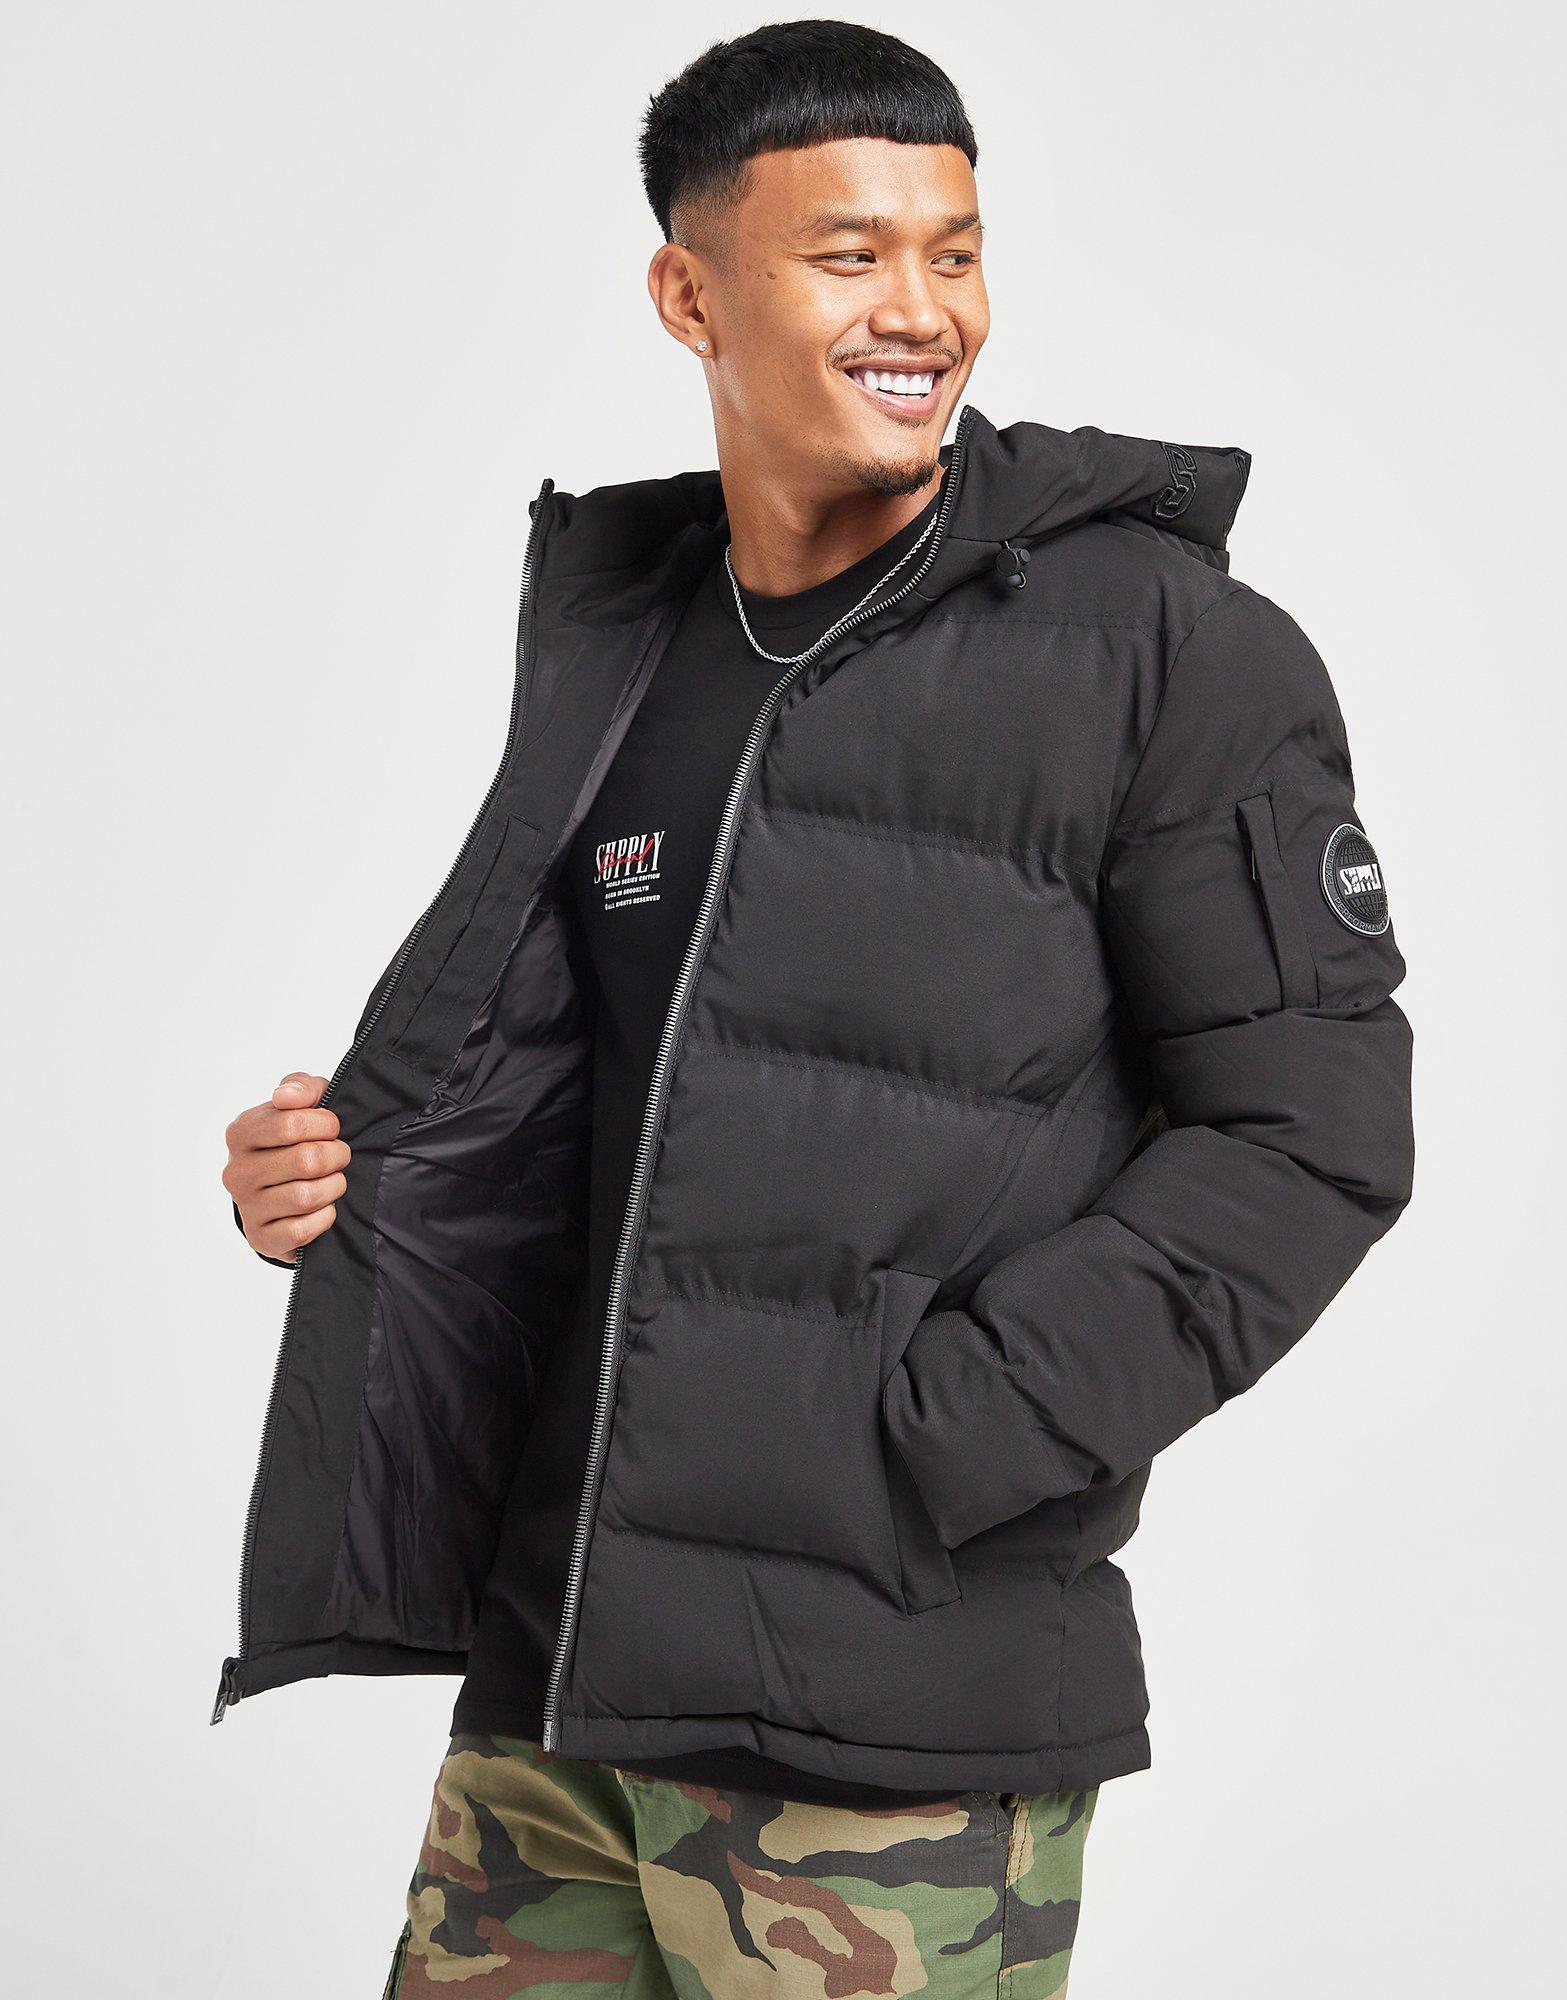 superdry jackets - Buy superdry jackets at Best Price in Malaysia